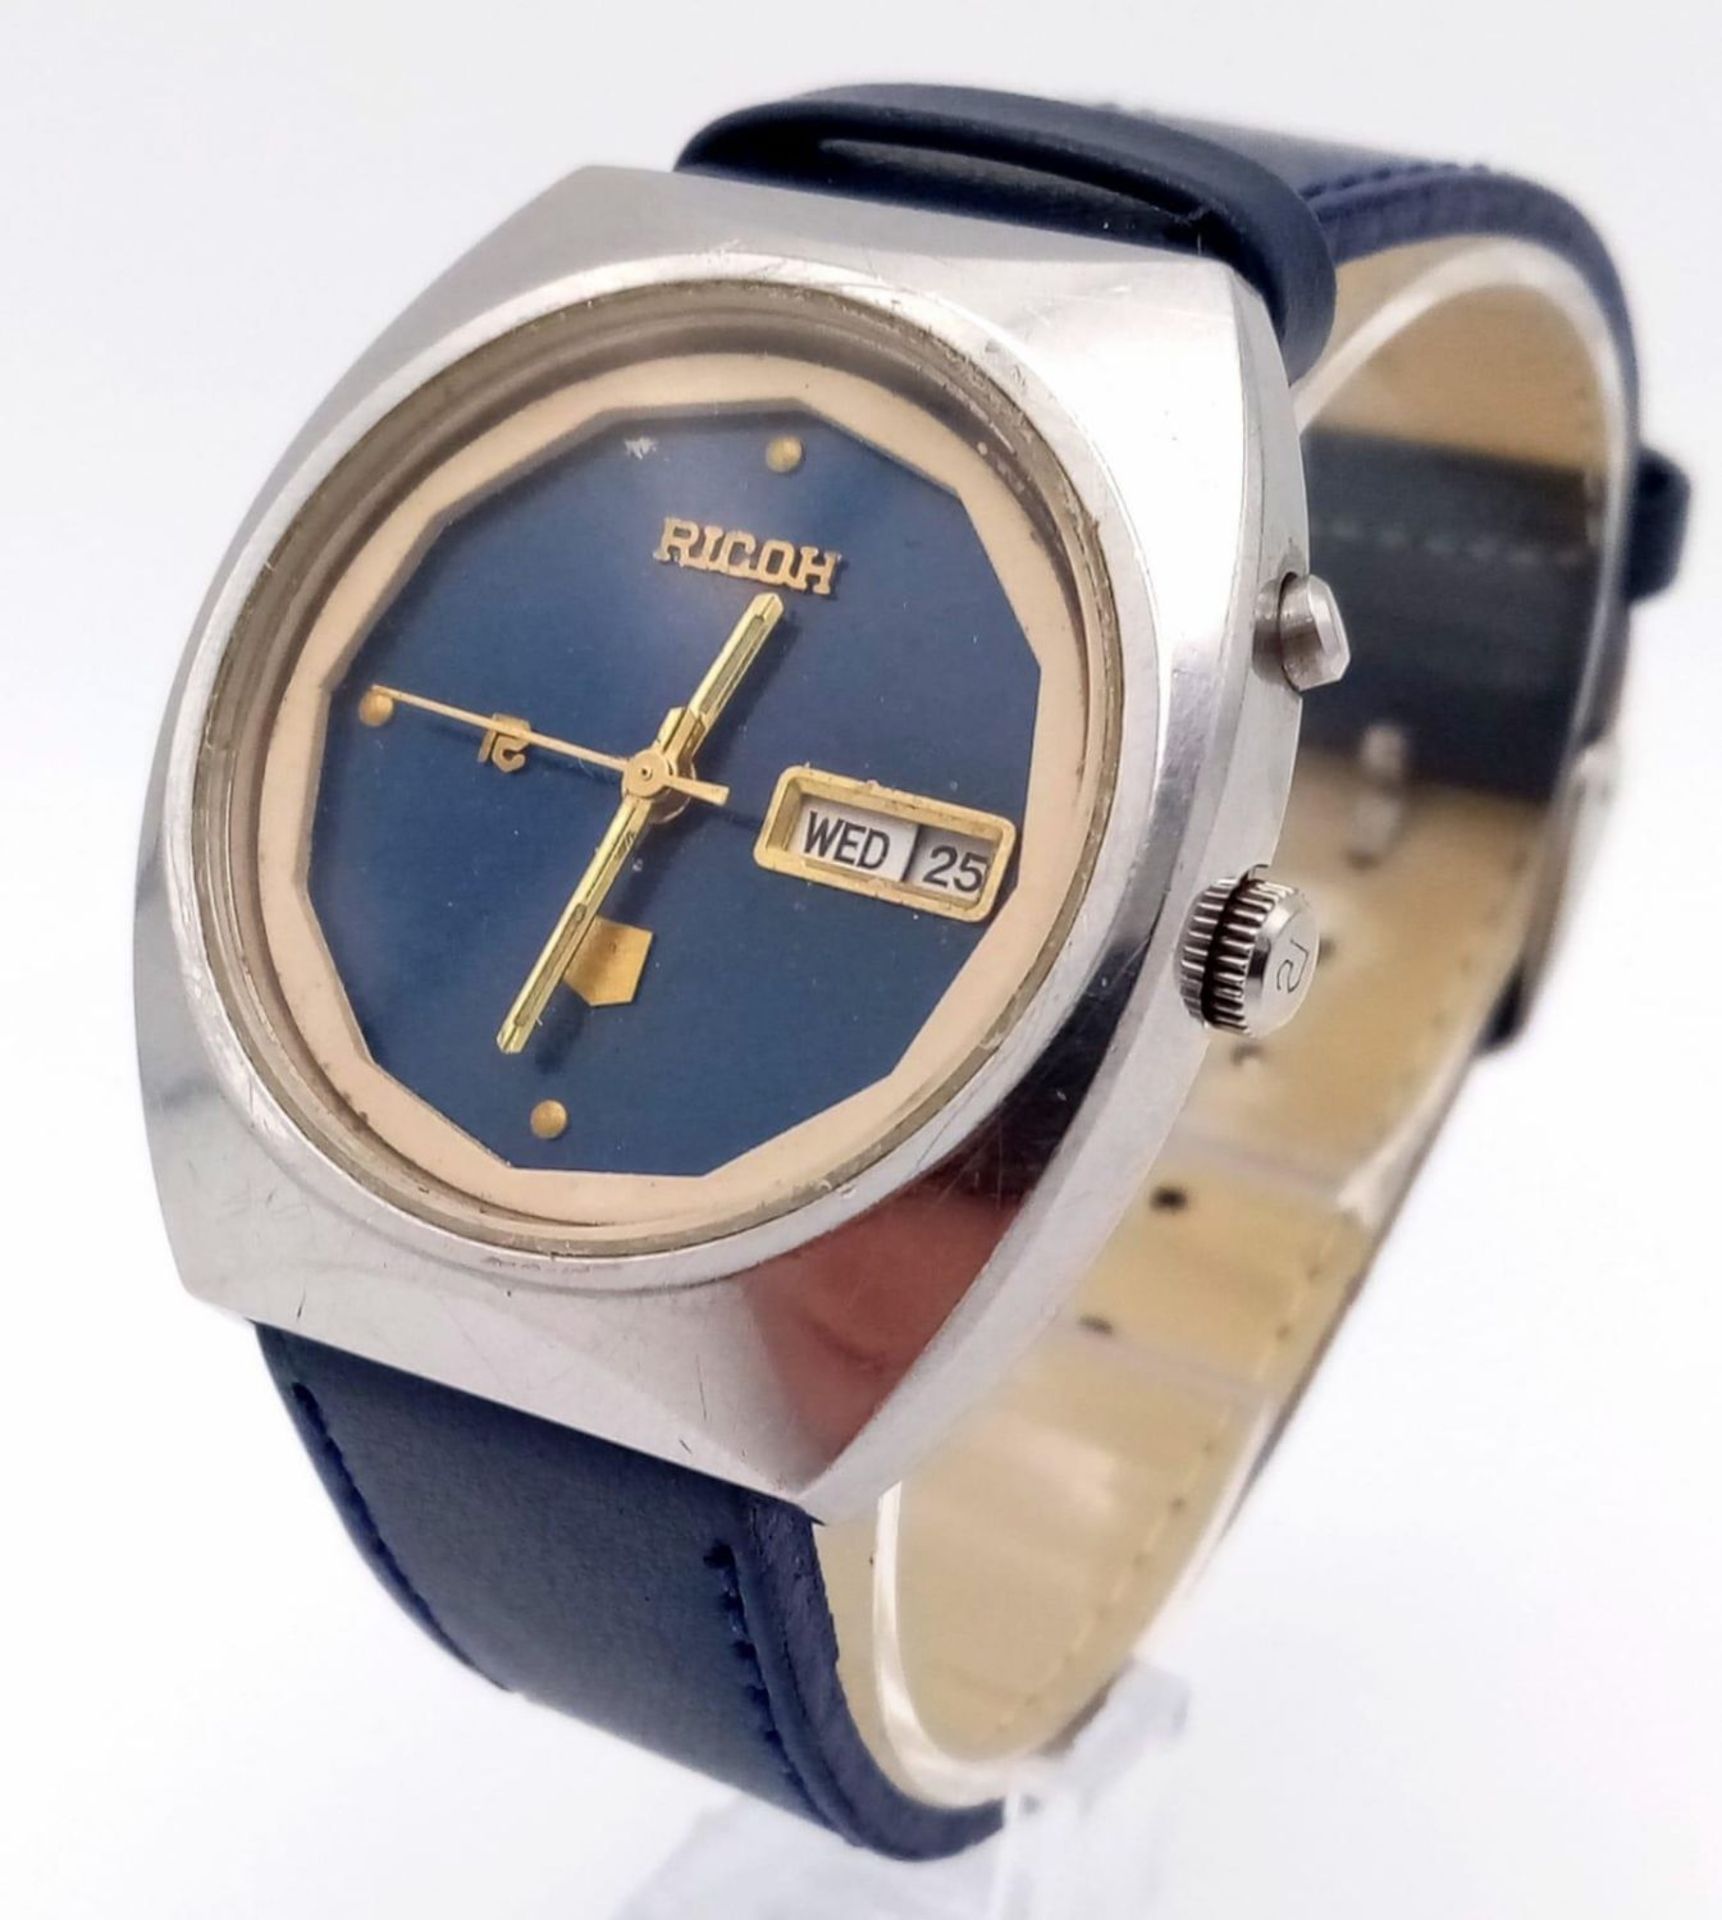 A Vintage Ricoh Automatic Gents Watch. Blue leather strap. Stainless steel case - 37mm. Blue dial - Image 3 of 12